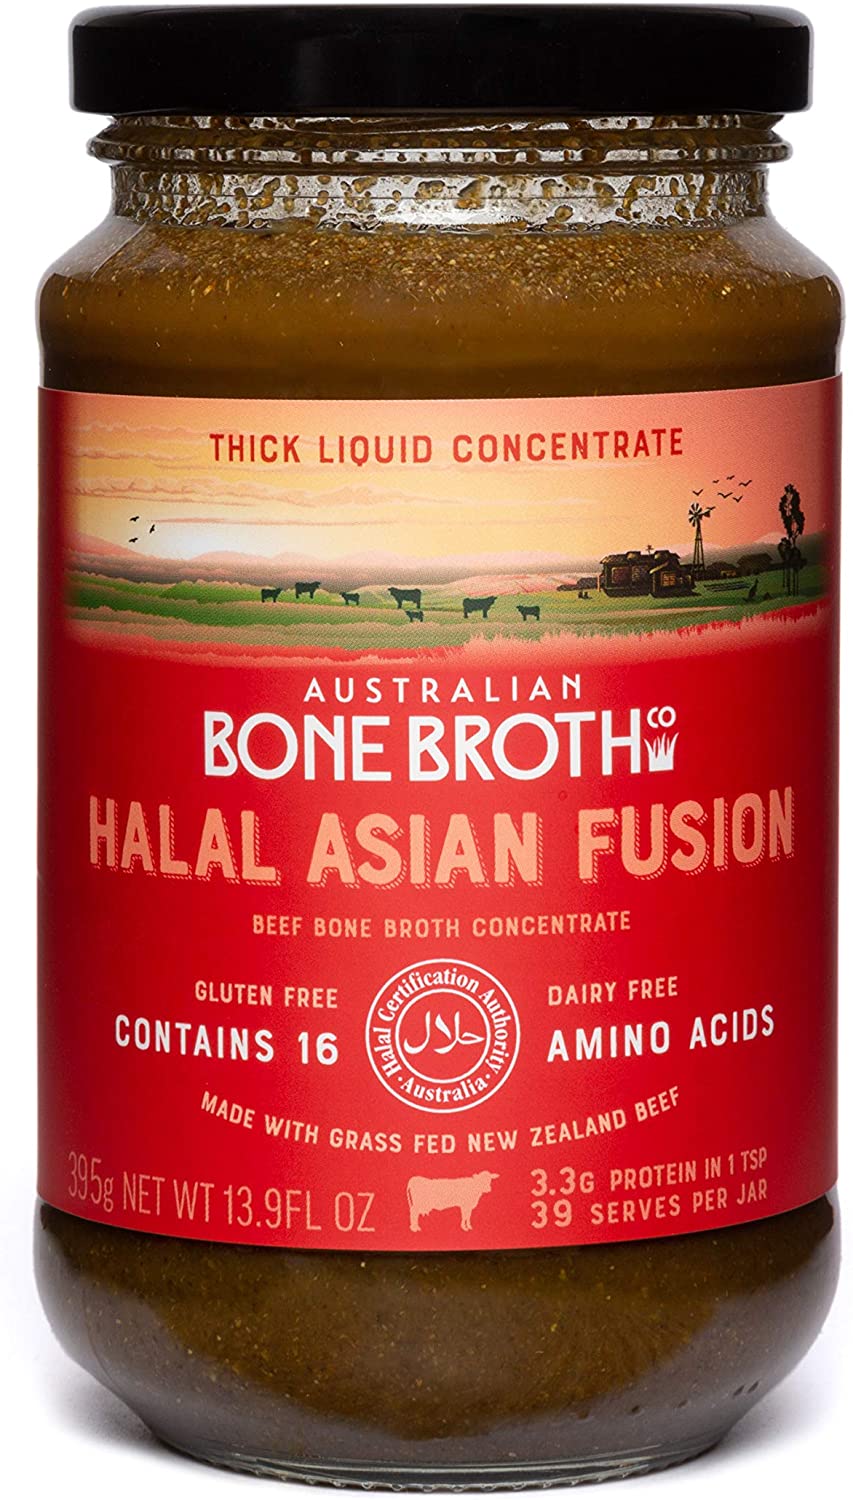 Halal Beef Bone Broth Concentrate  Certified Halal Asian Fusion – Great Protein Food Source   Instant Spicy Broth For Gut Health, Digestion And General Well Being. 395 Grams Made In Australia 